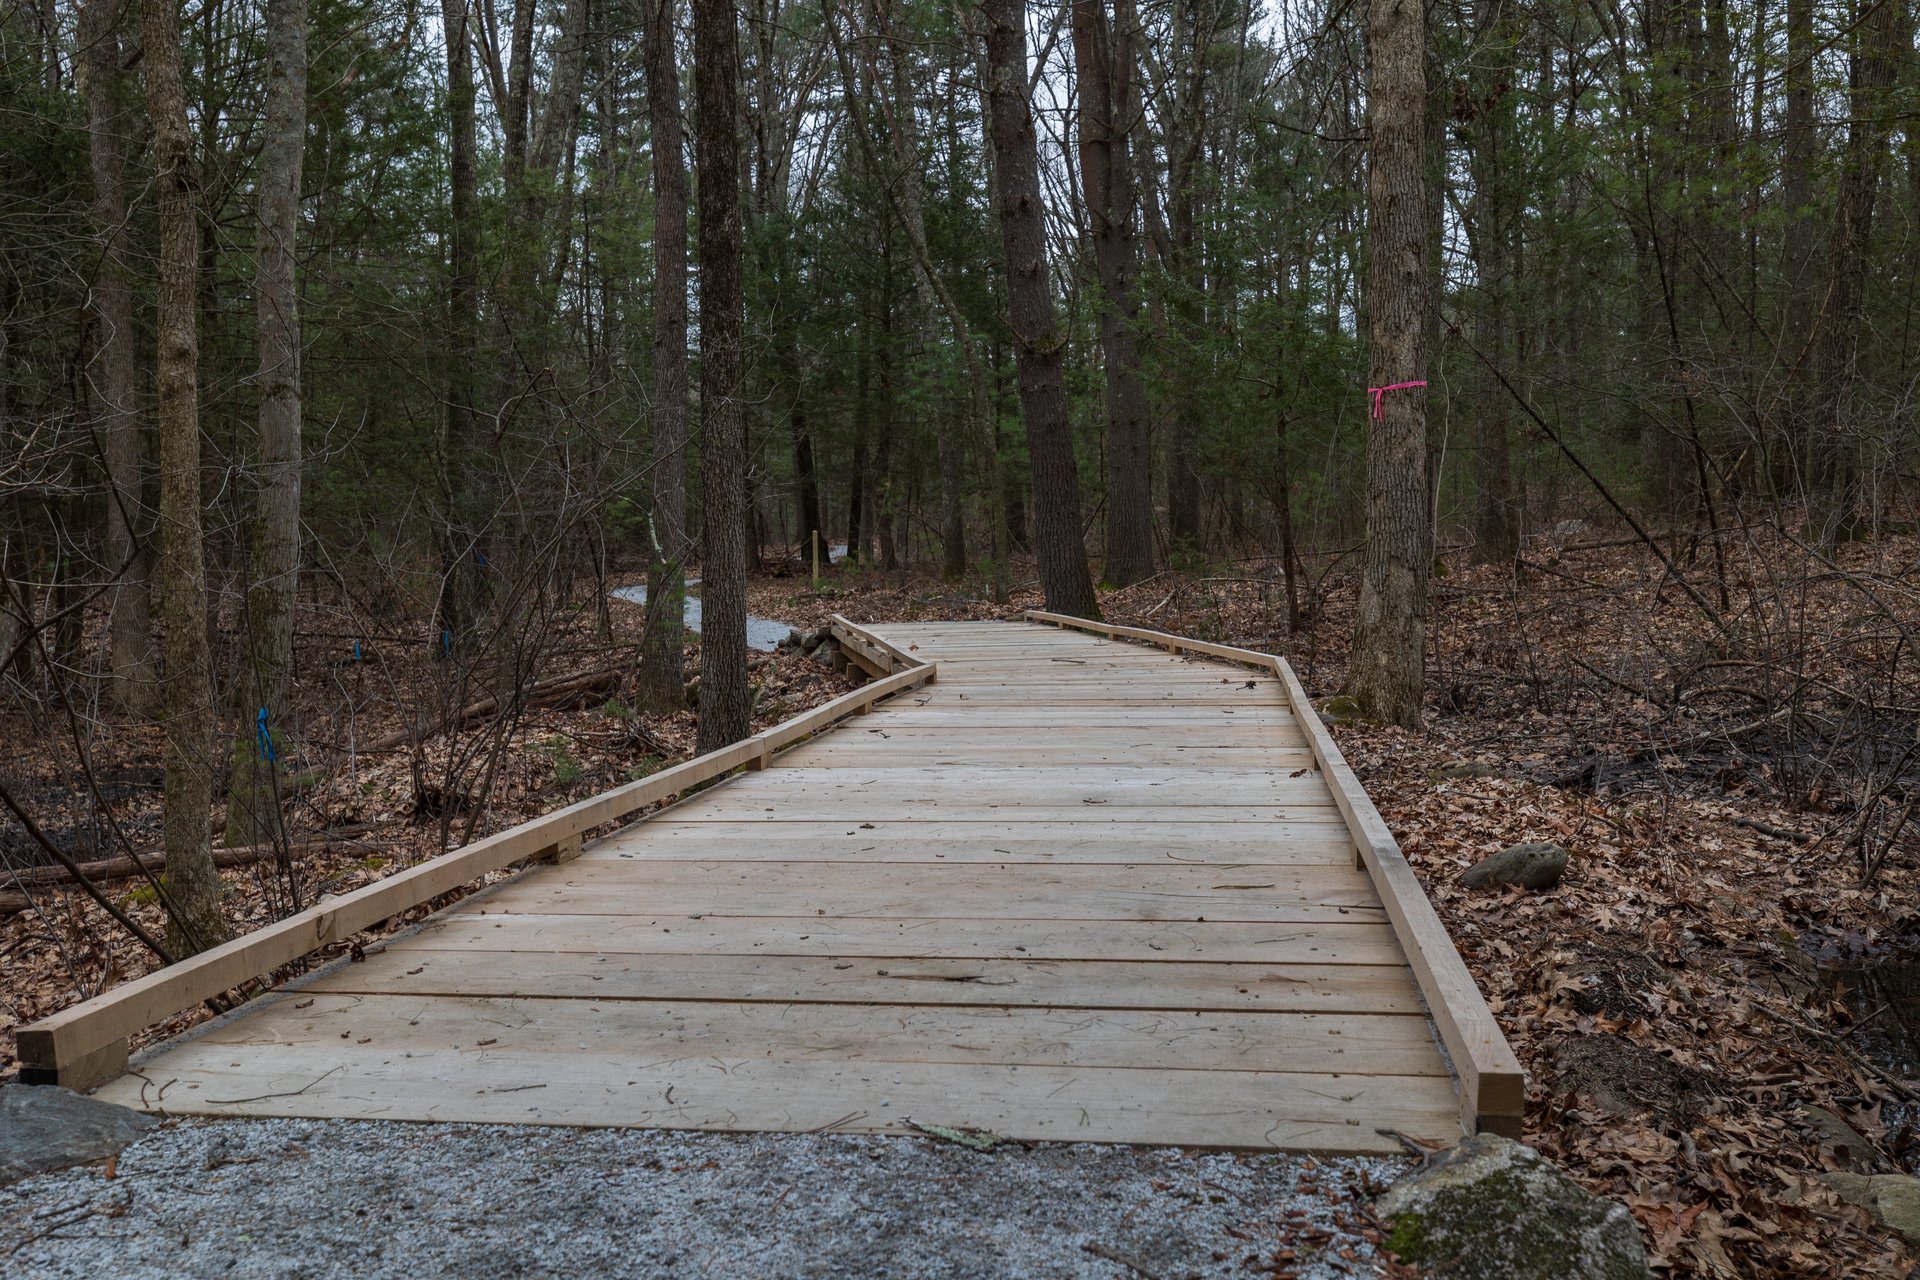 A wooden boardwalk with a gravel path on either ends cutting though a forest.